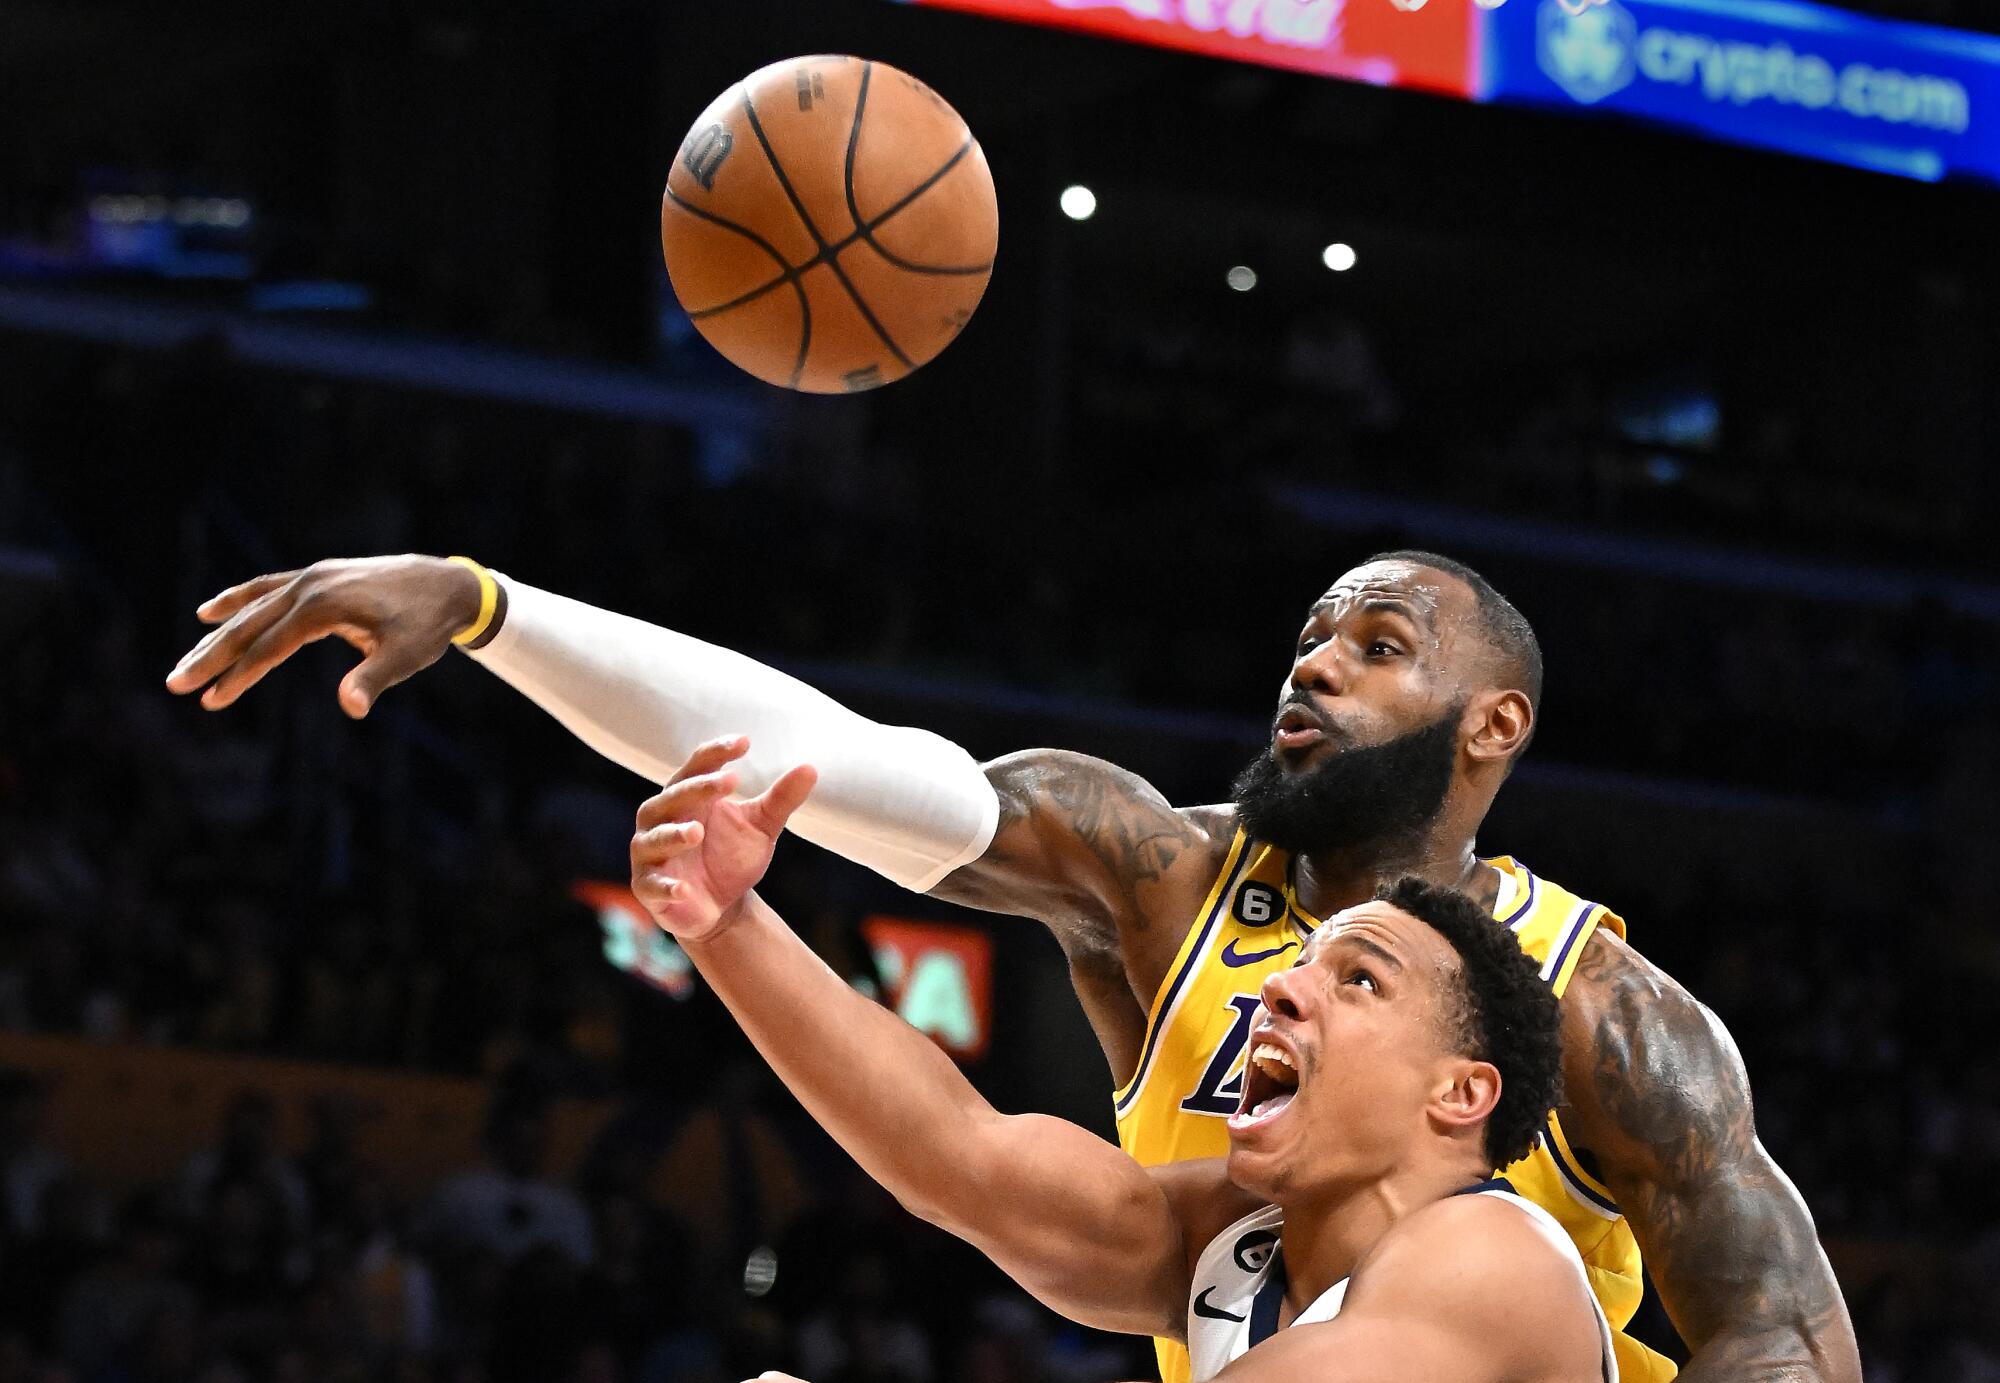 The Lakers' LeBron James blocks the shot of the Grizzlies' Desmond Bane in the second quarter.